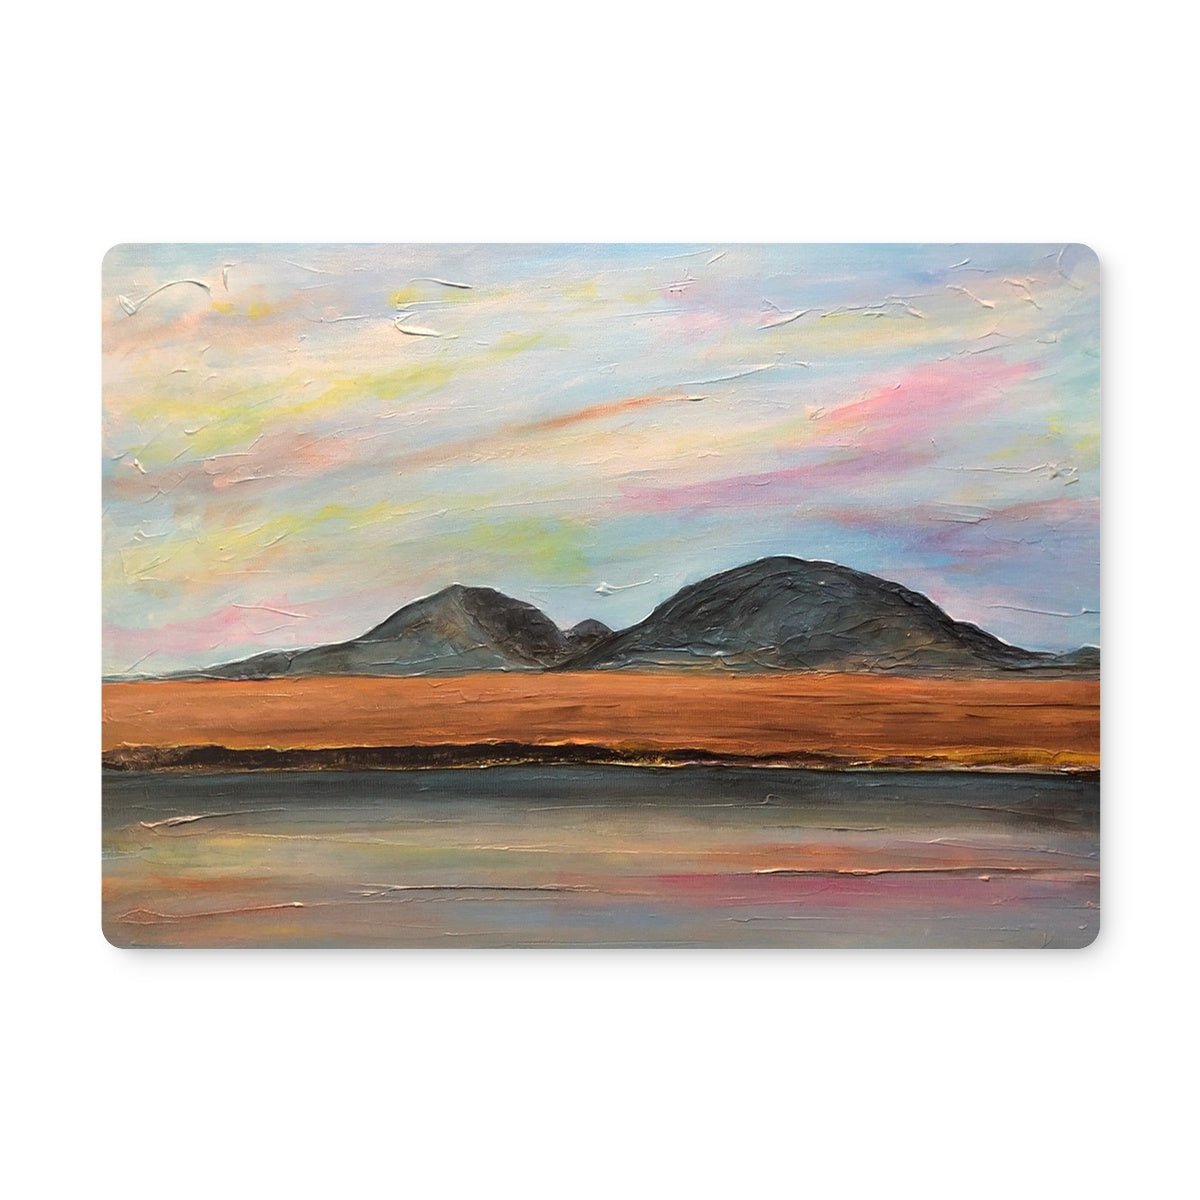 Jura Dawn Art Gifts Placemat-Placemats-Hebridean Islands Art Gallery-6 Placemats-Paintings, Prints, Homeware, Art Gifts From Scotland By Scottish Artist Kevin Hunter